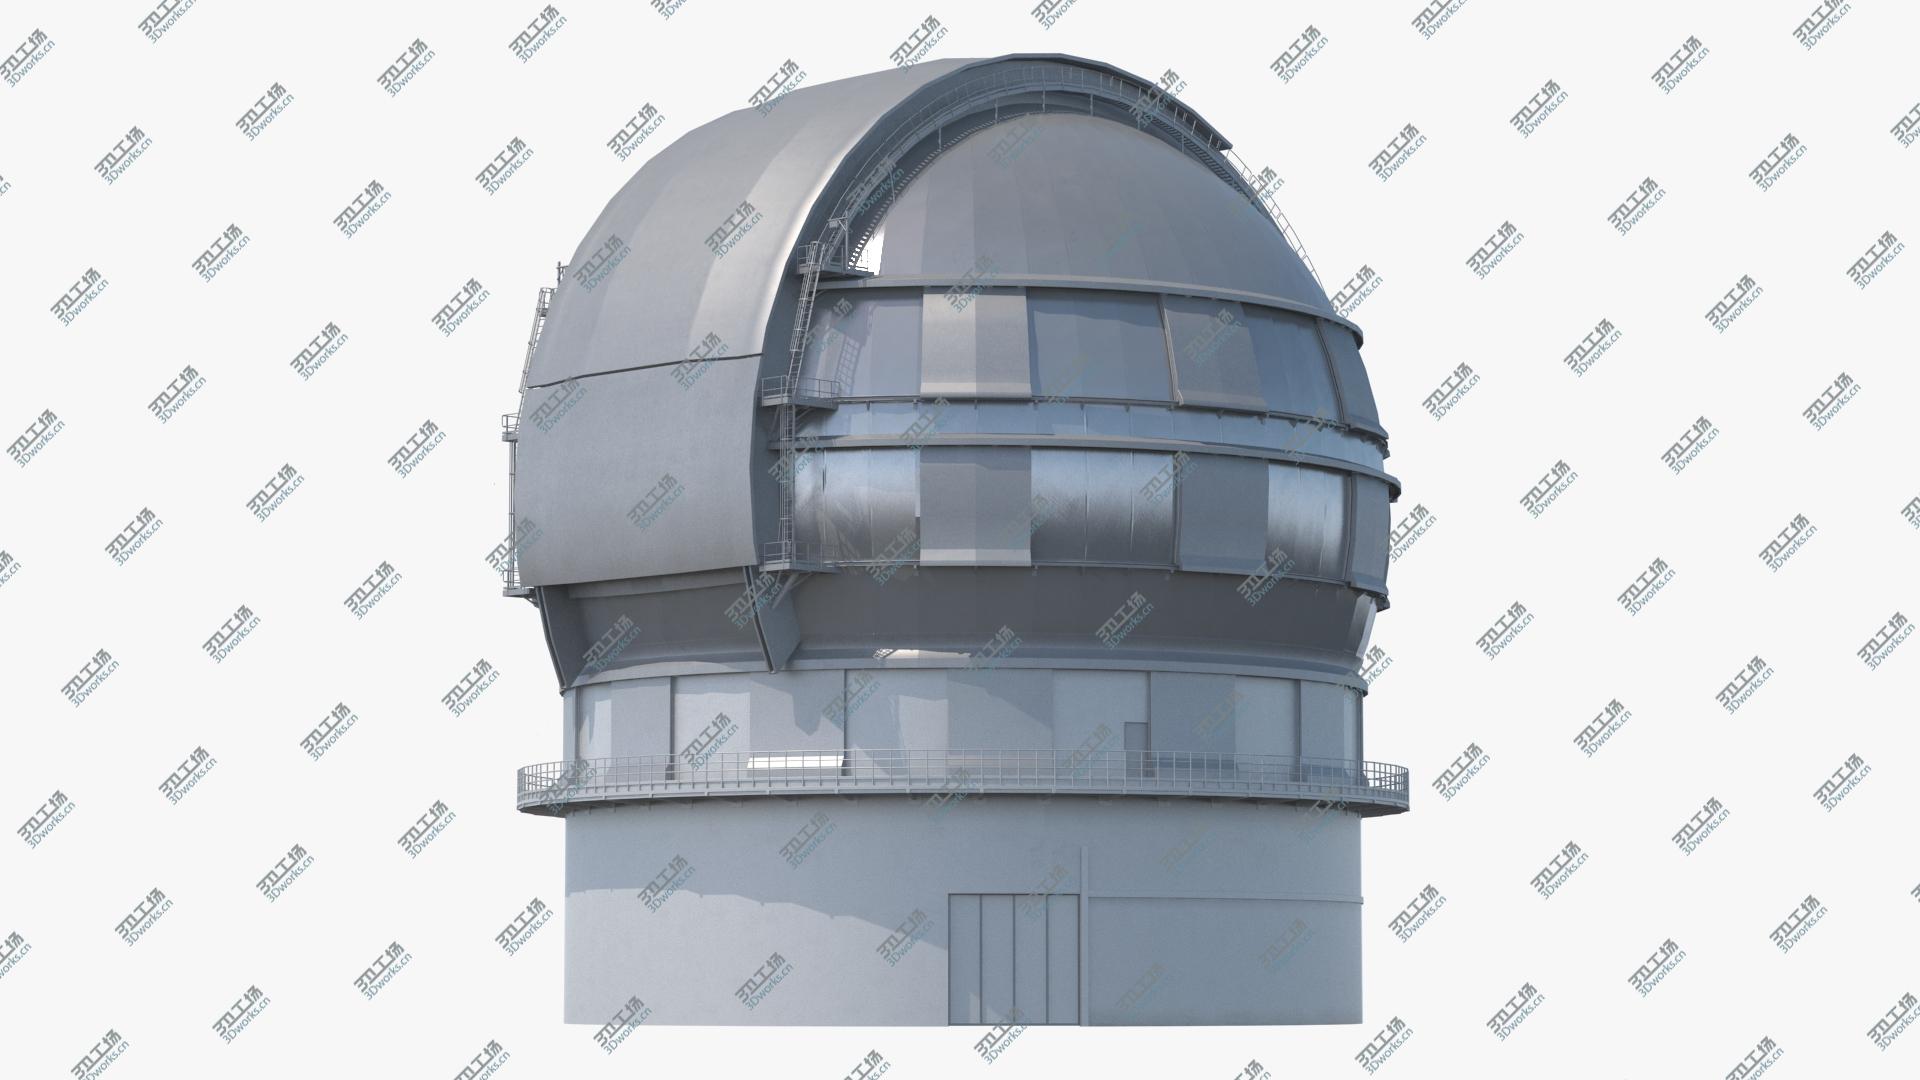 images/goods_img/2021040164/Astronomical Observatory Dome Rigged 3D/2.jpg